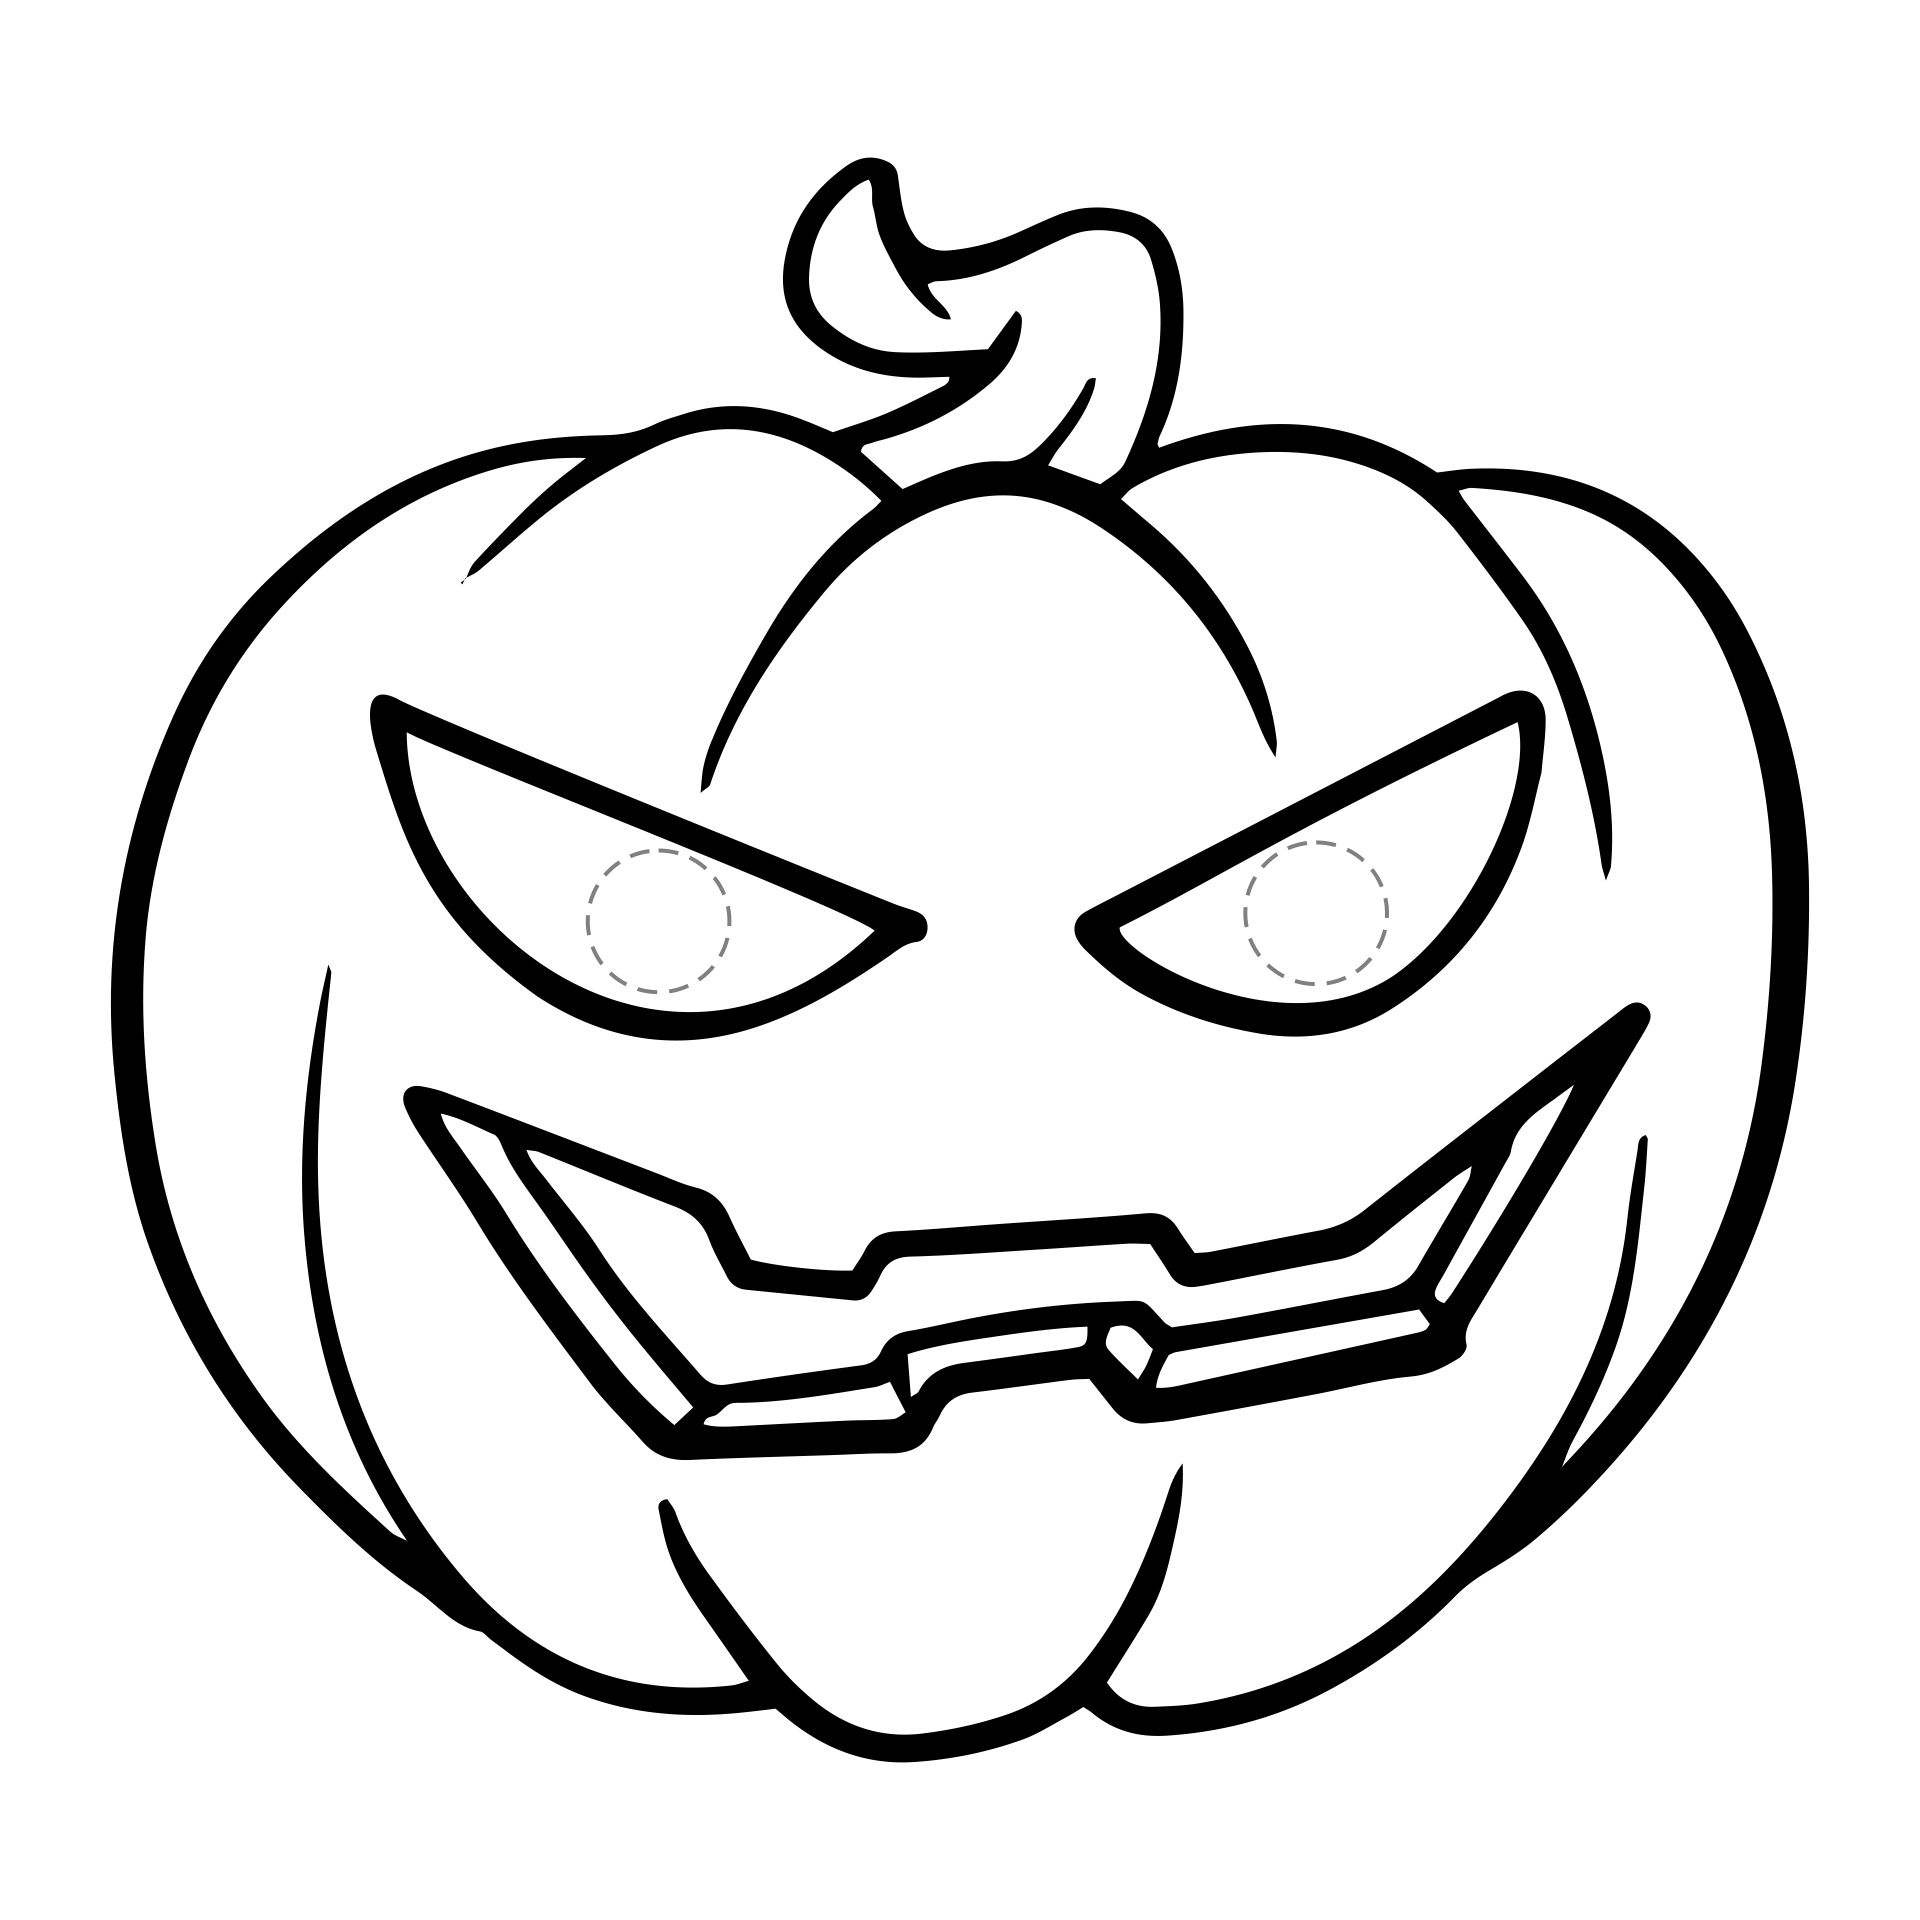 Halloween Pumpkin Mask Coloring Page